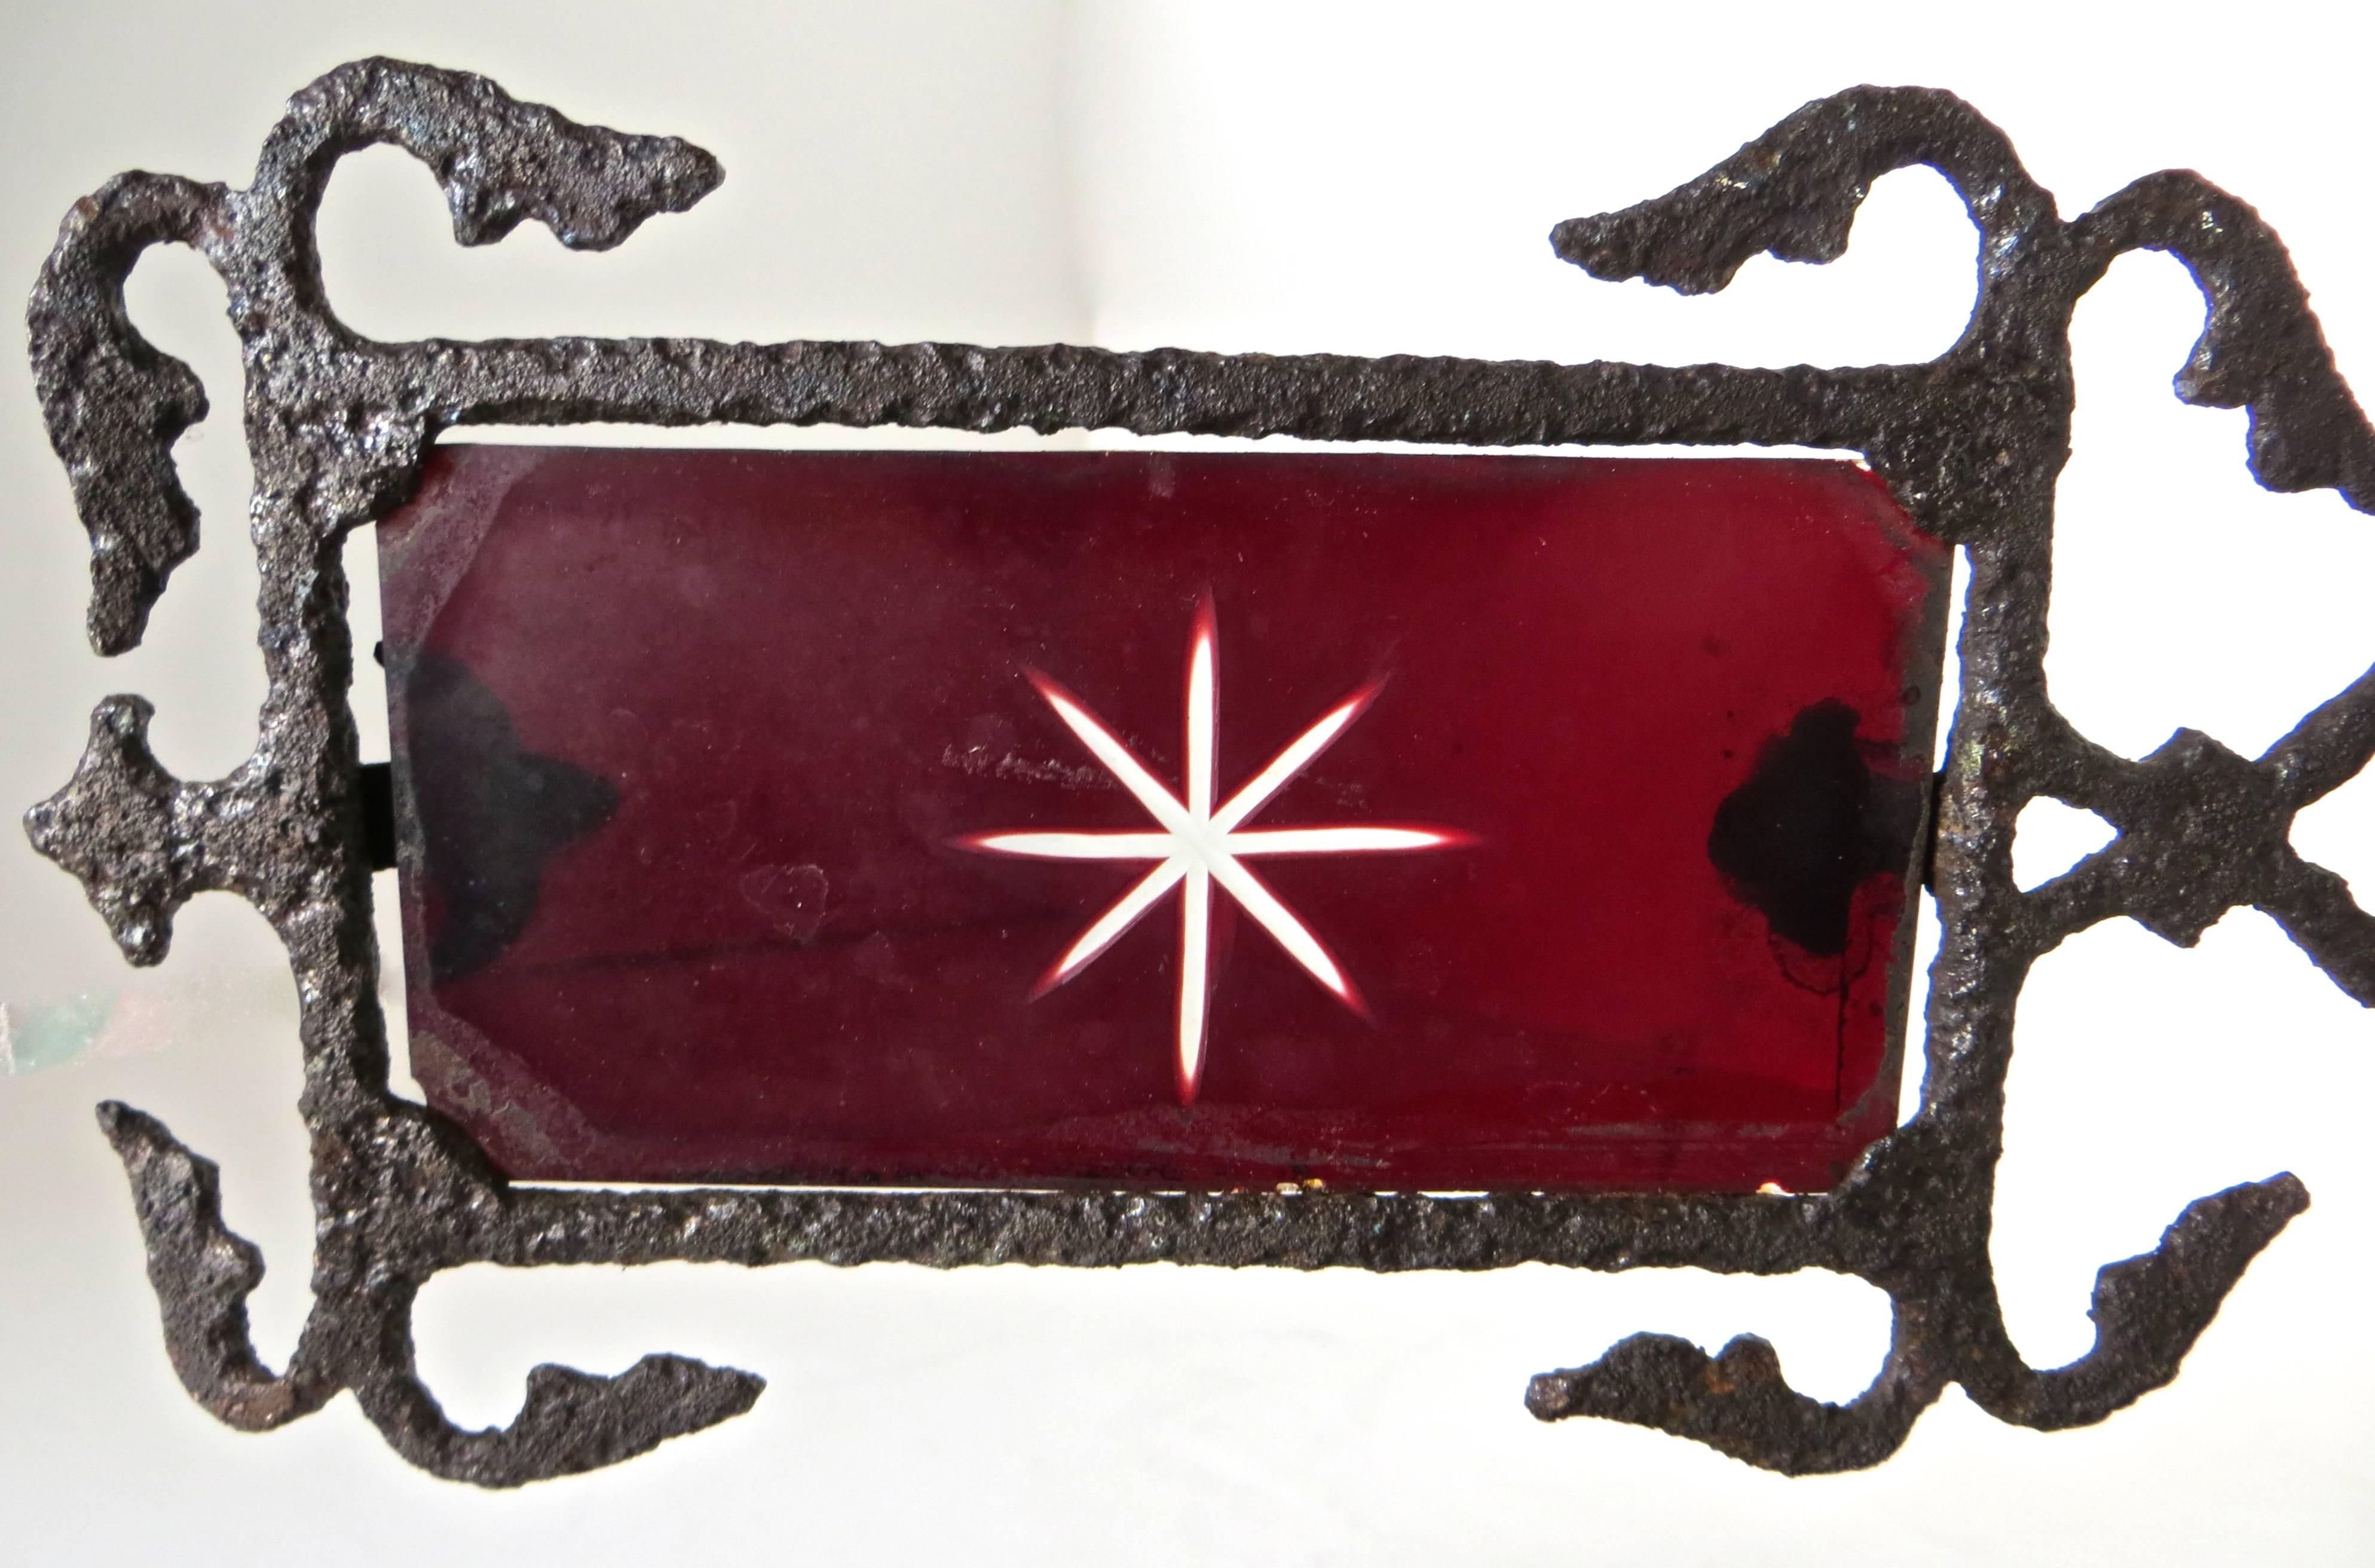 Diminutive arrow directional banner weathervane with original red glass inserted in an iron frame perimeter, with a cast iron arrow design on each corner. The red glass has a deeply etched translucent multifaceted white star pattern on both side).